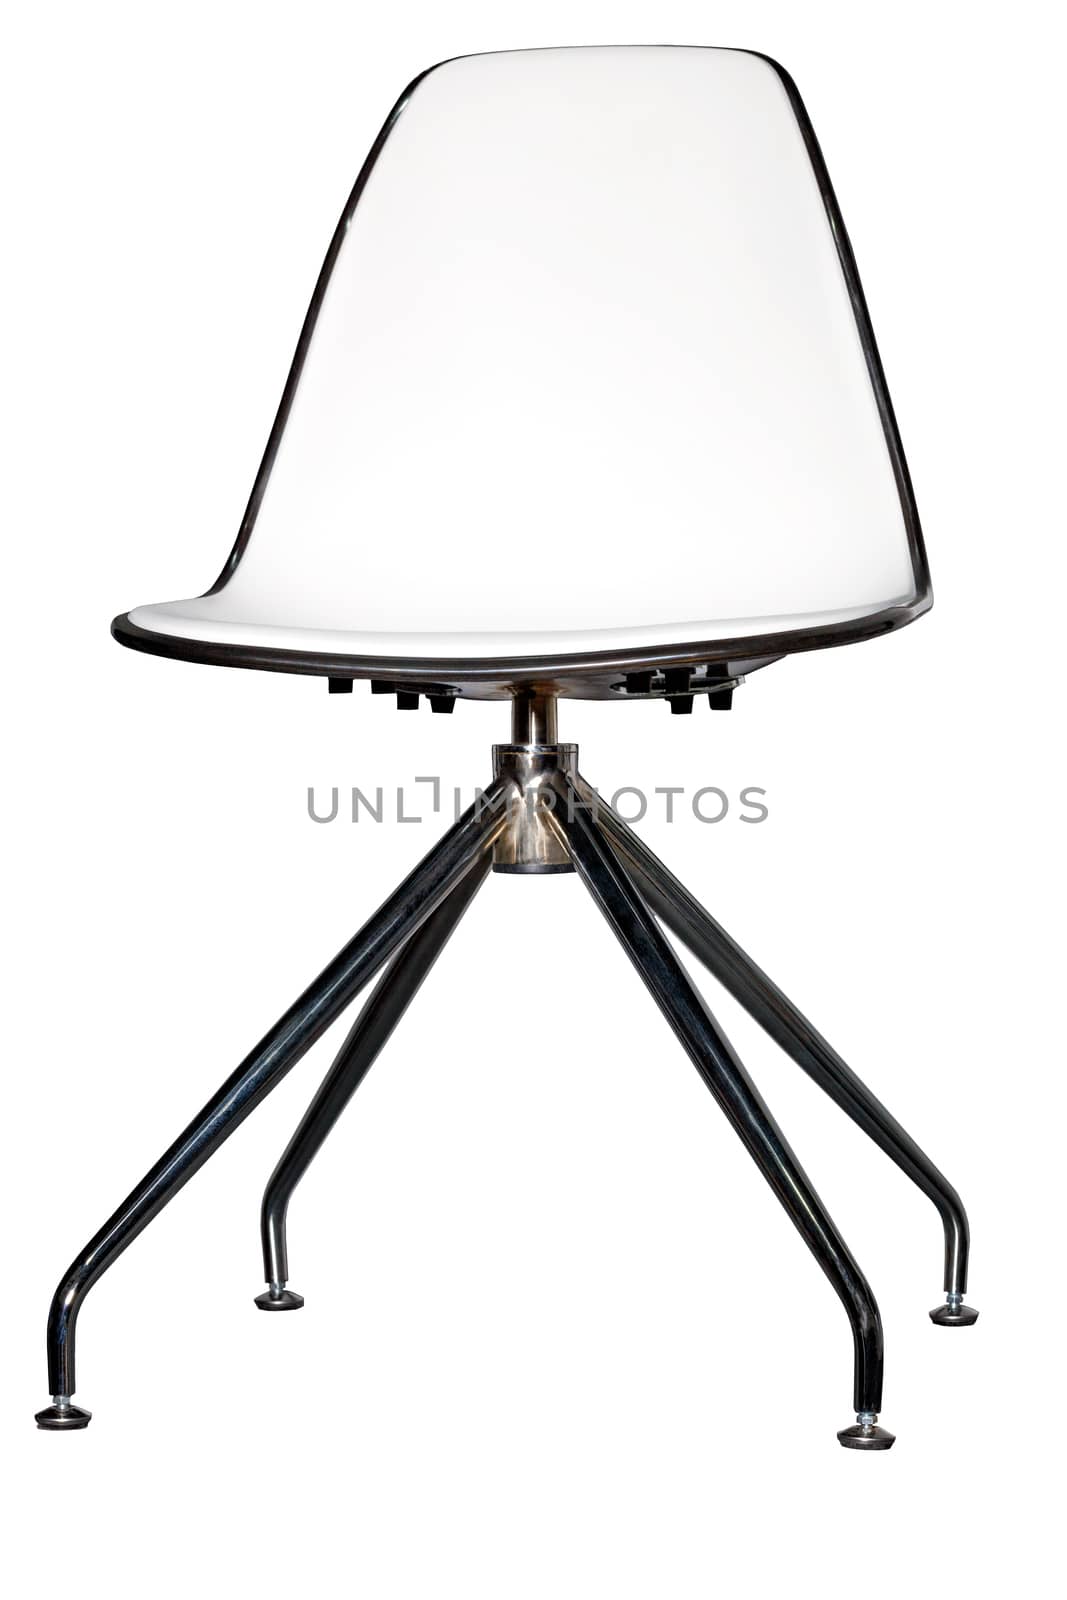 A metal chair with a soft saddle is isolated on a white background. by Sergii